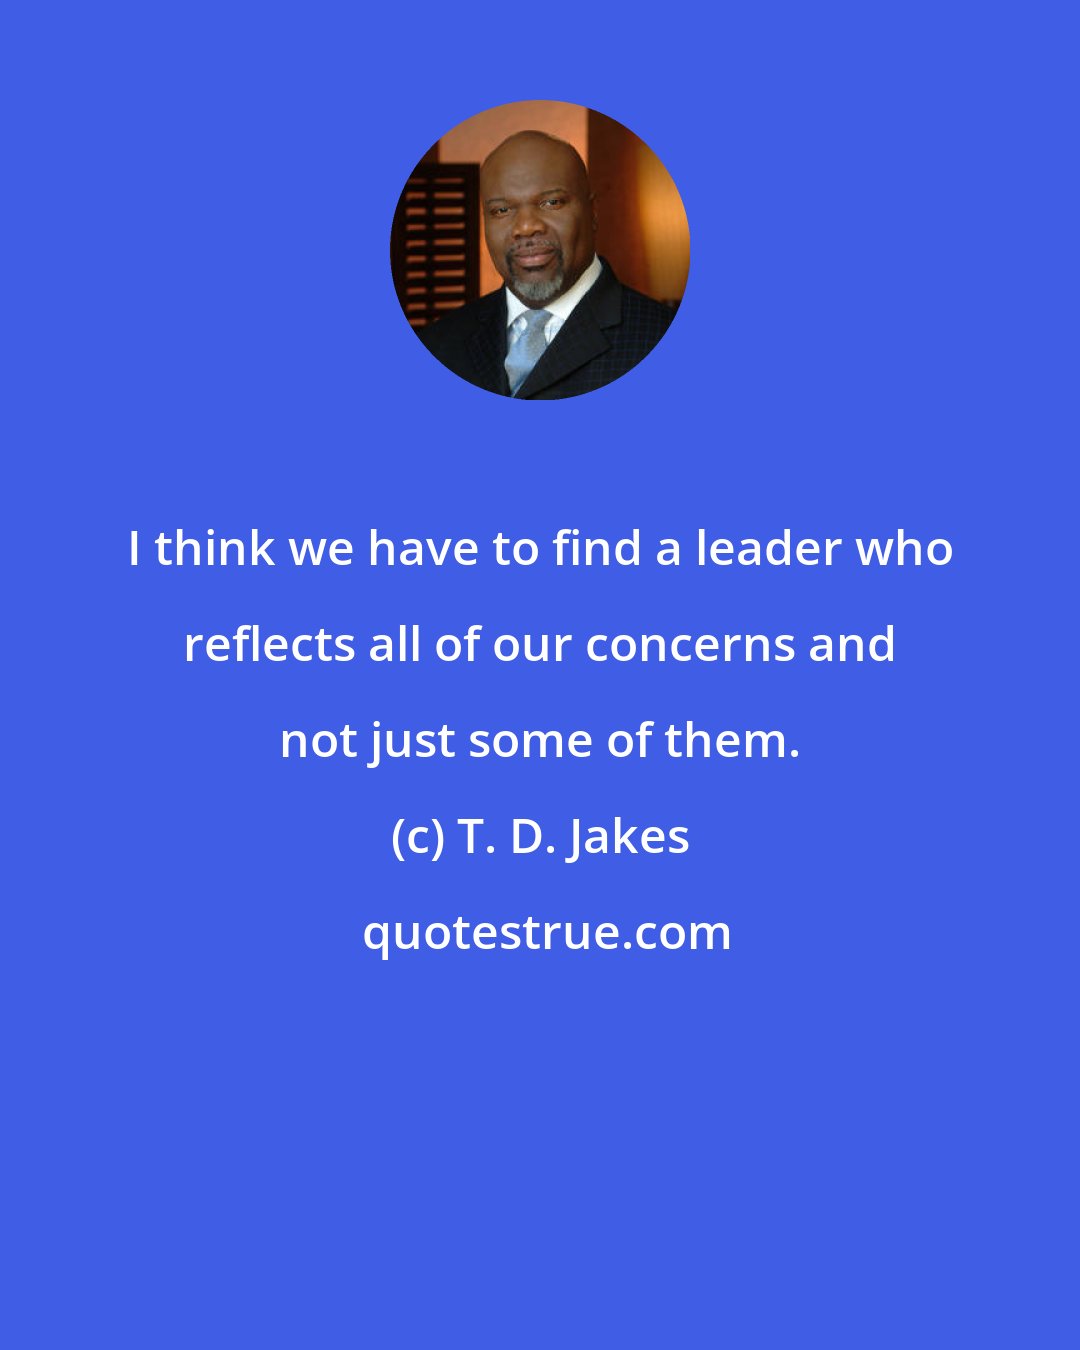 T. D. Jakes: I think we have to find a leader who reflects all of our concerns and not just some of them.